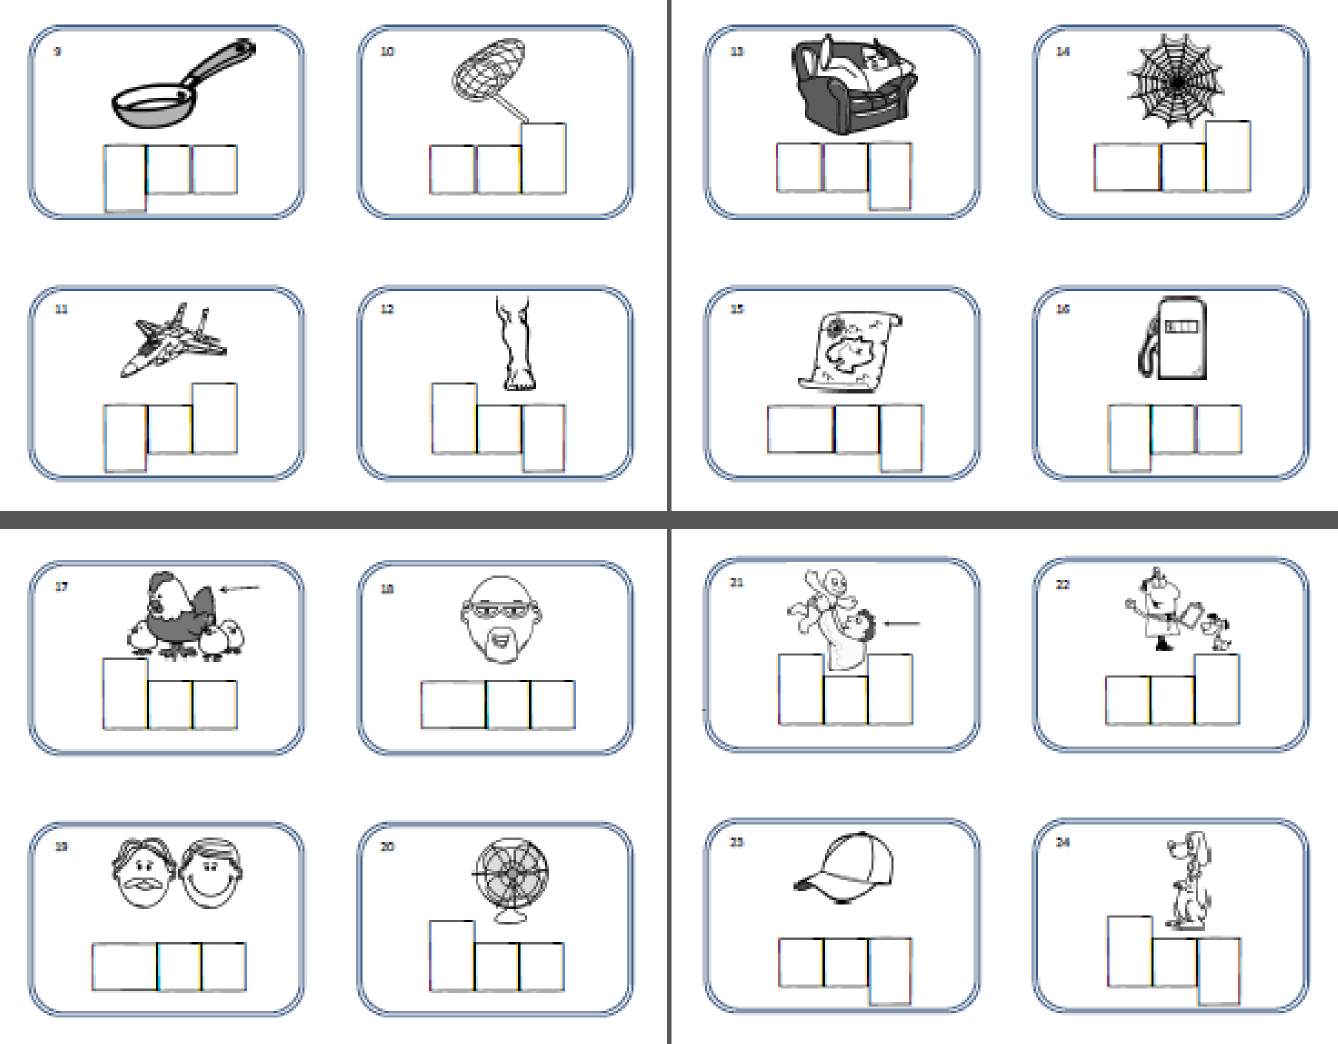 Cvc Word Worksheet The Best Worksheets Image Collection